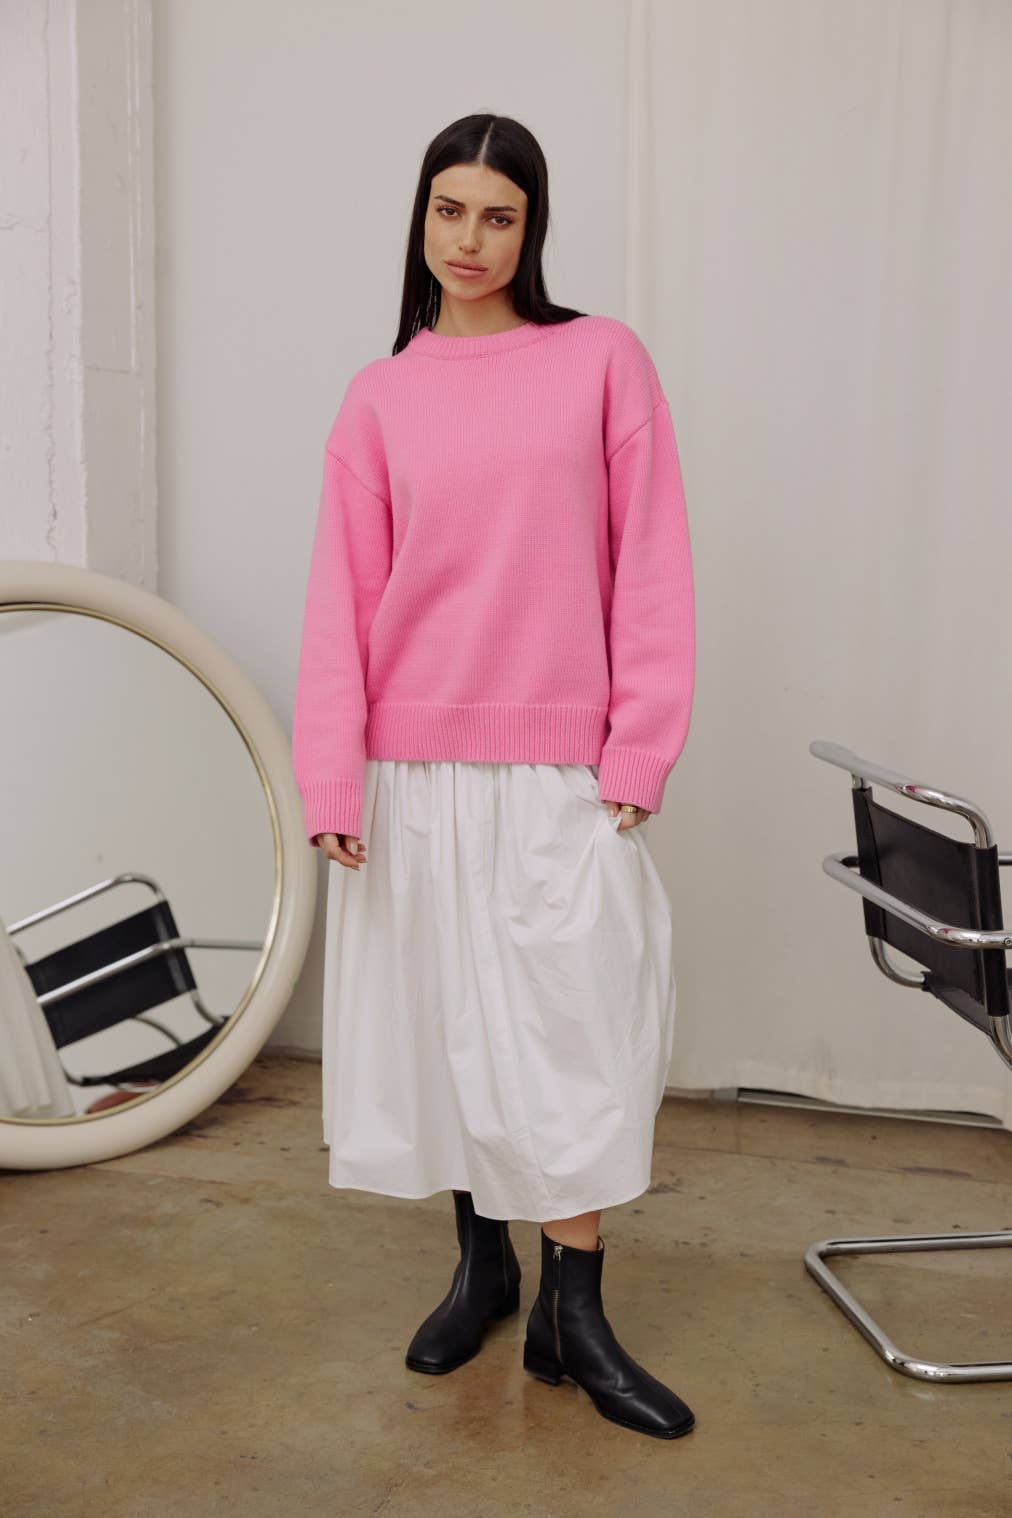 MOD REF - The Holly Sweater | Relaxed Cotton Crewneck: LARGE / PINK